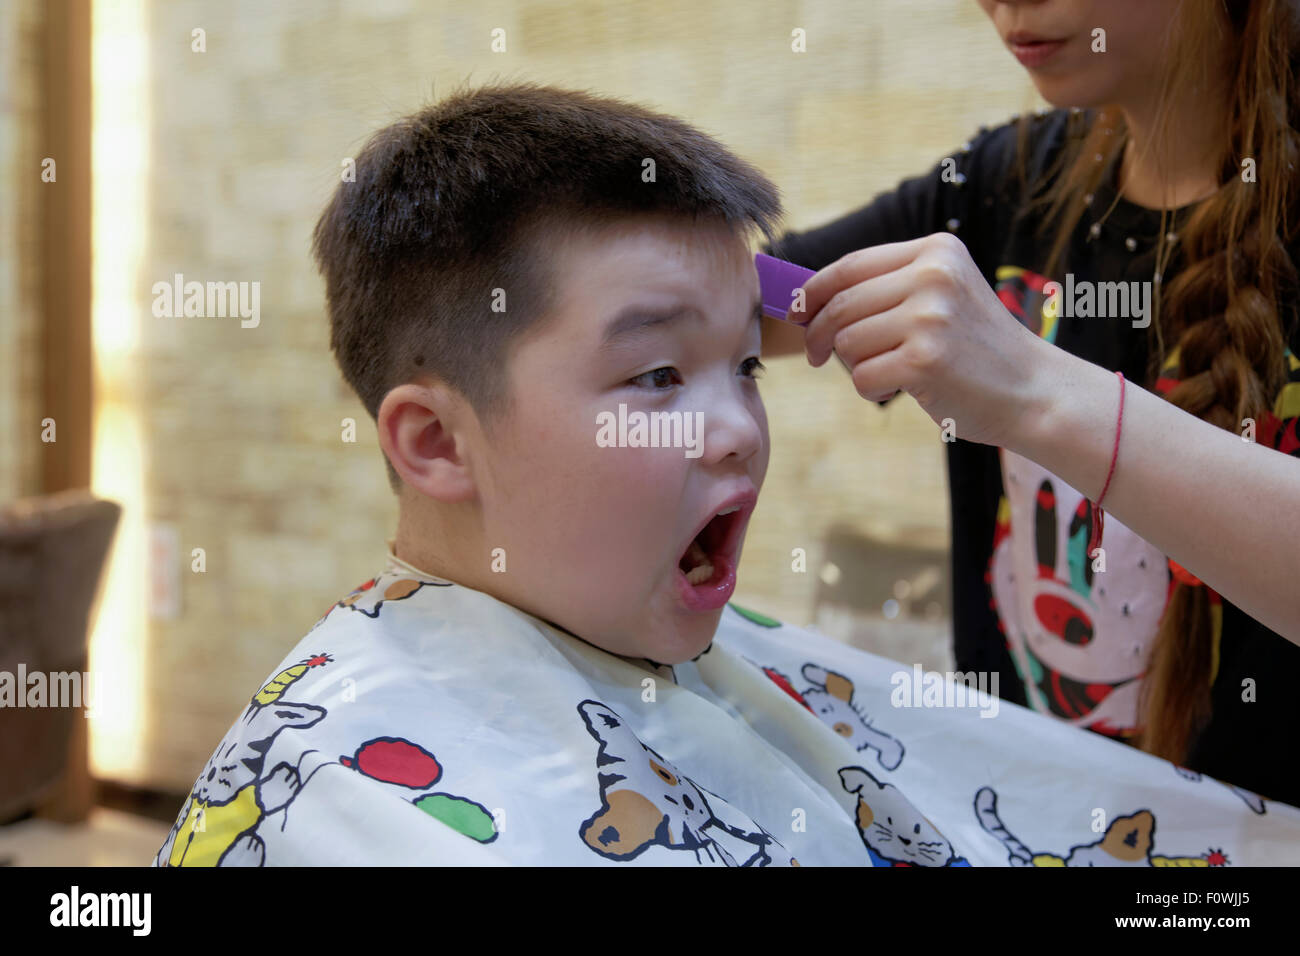 a 7 year old mixed race boy getting a hair cut Stock Photo - Alamy